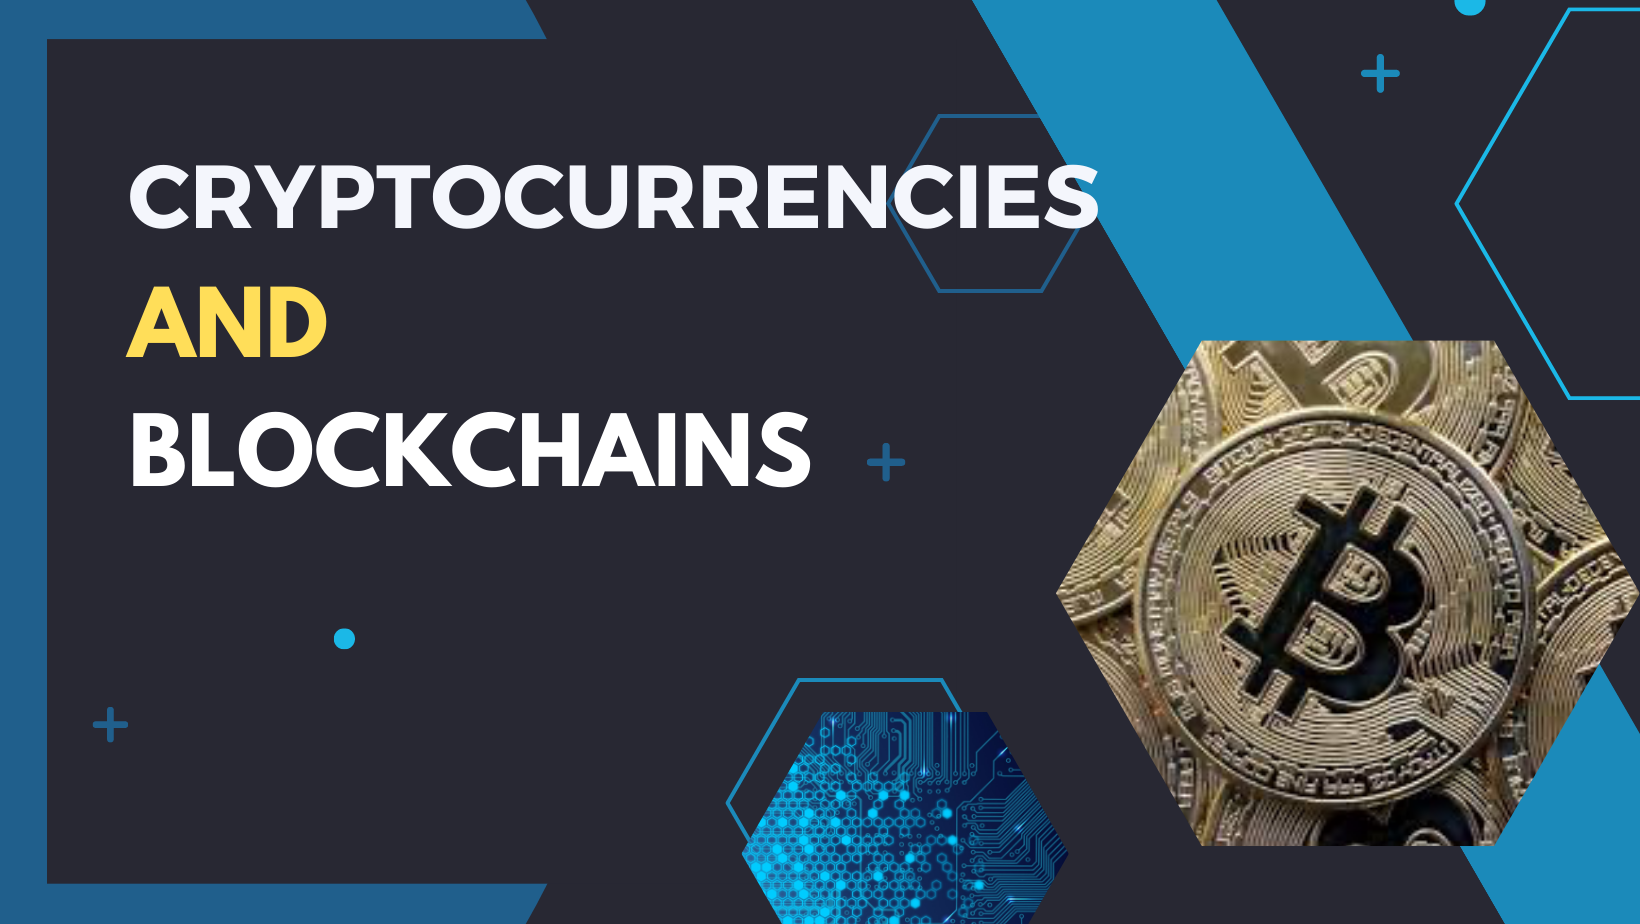 Cryptocurrencies and Blockchains	